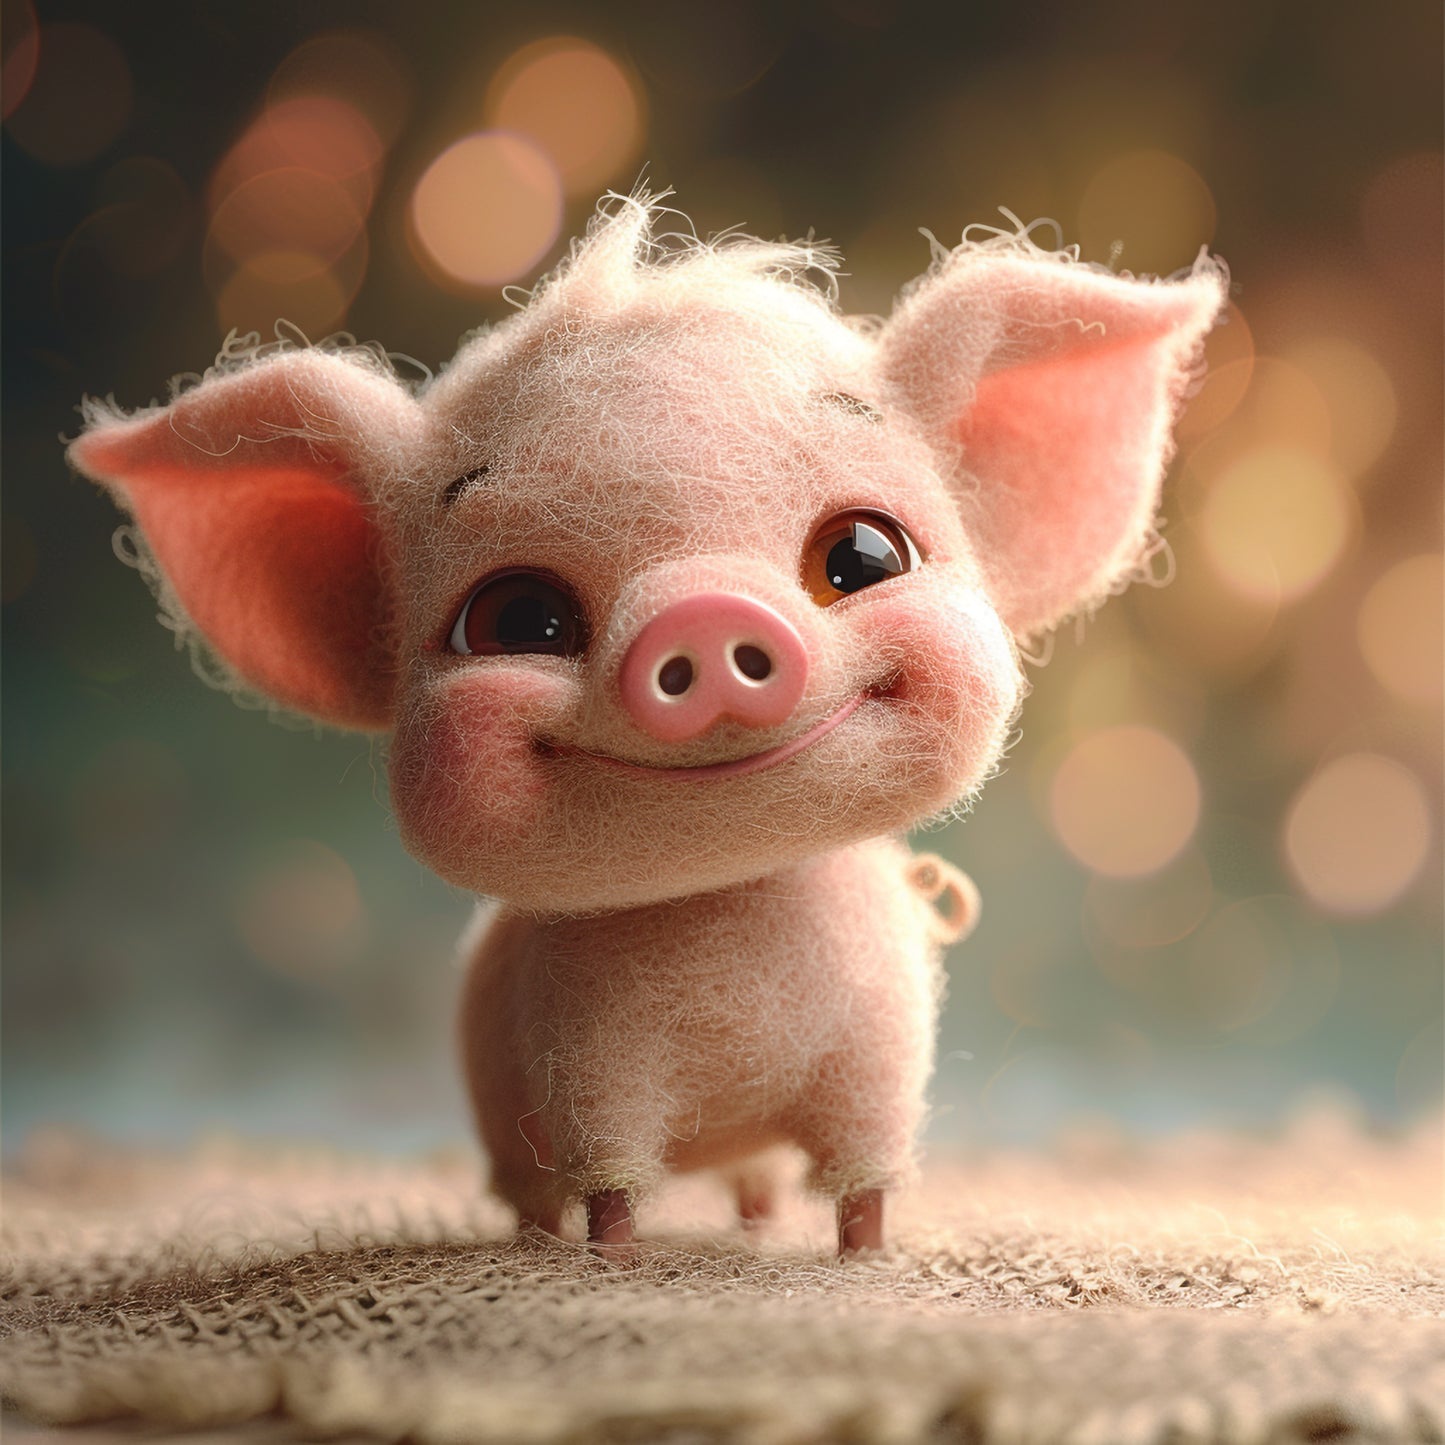 Adorable Needle Felted Smiling Piglet with Sparkling Eyes